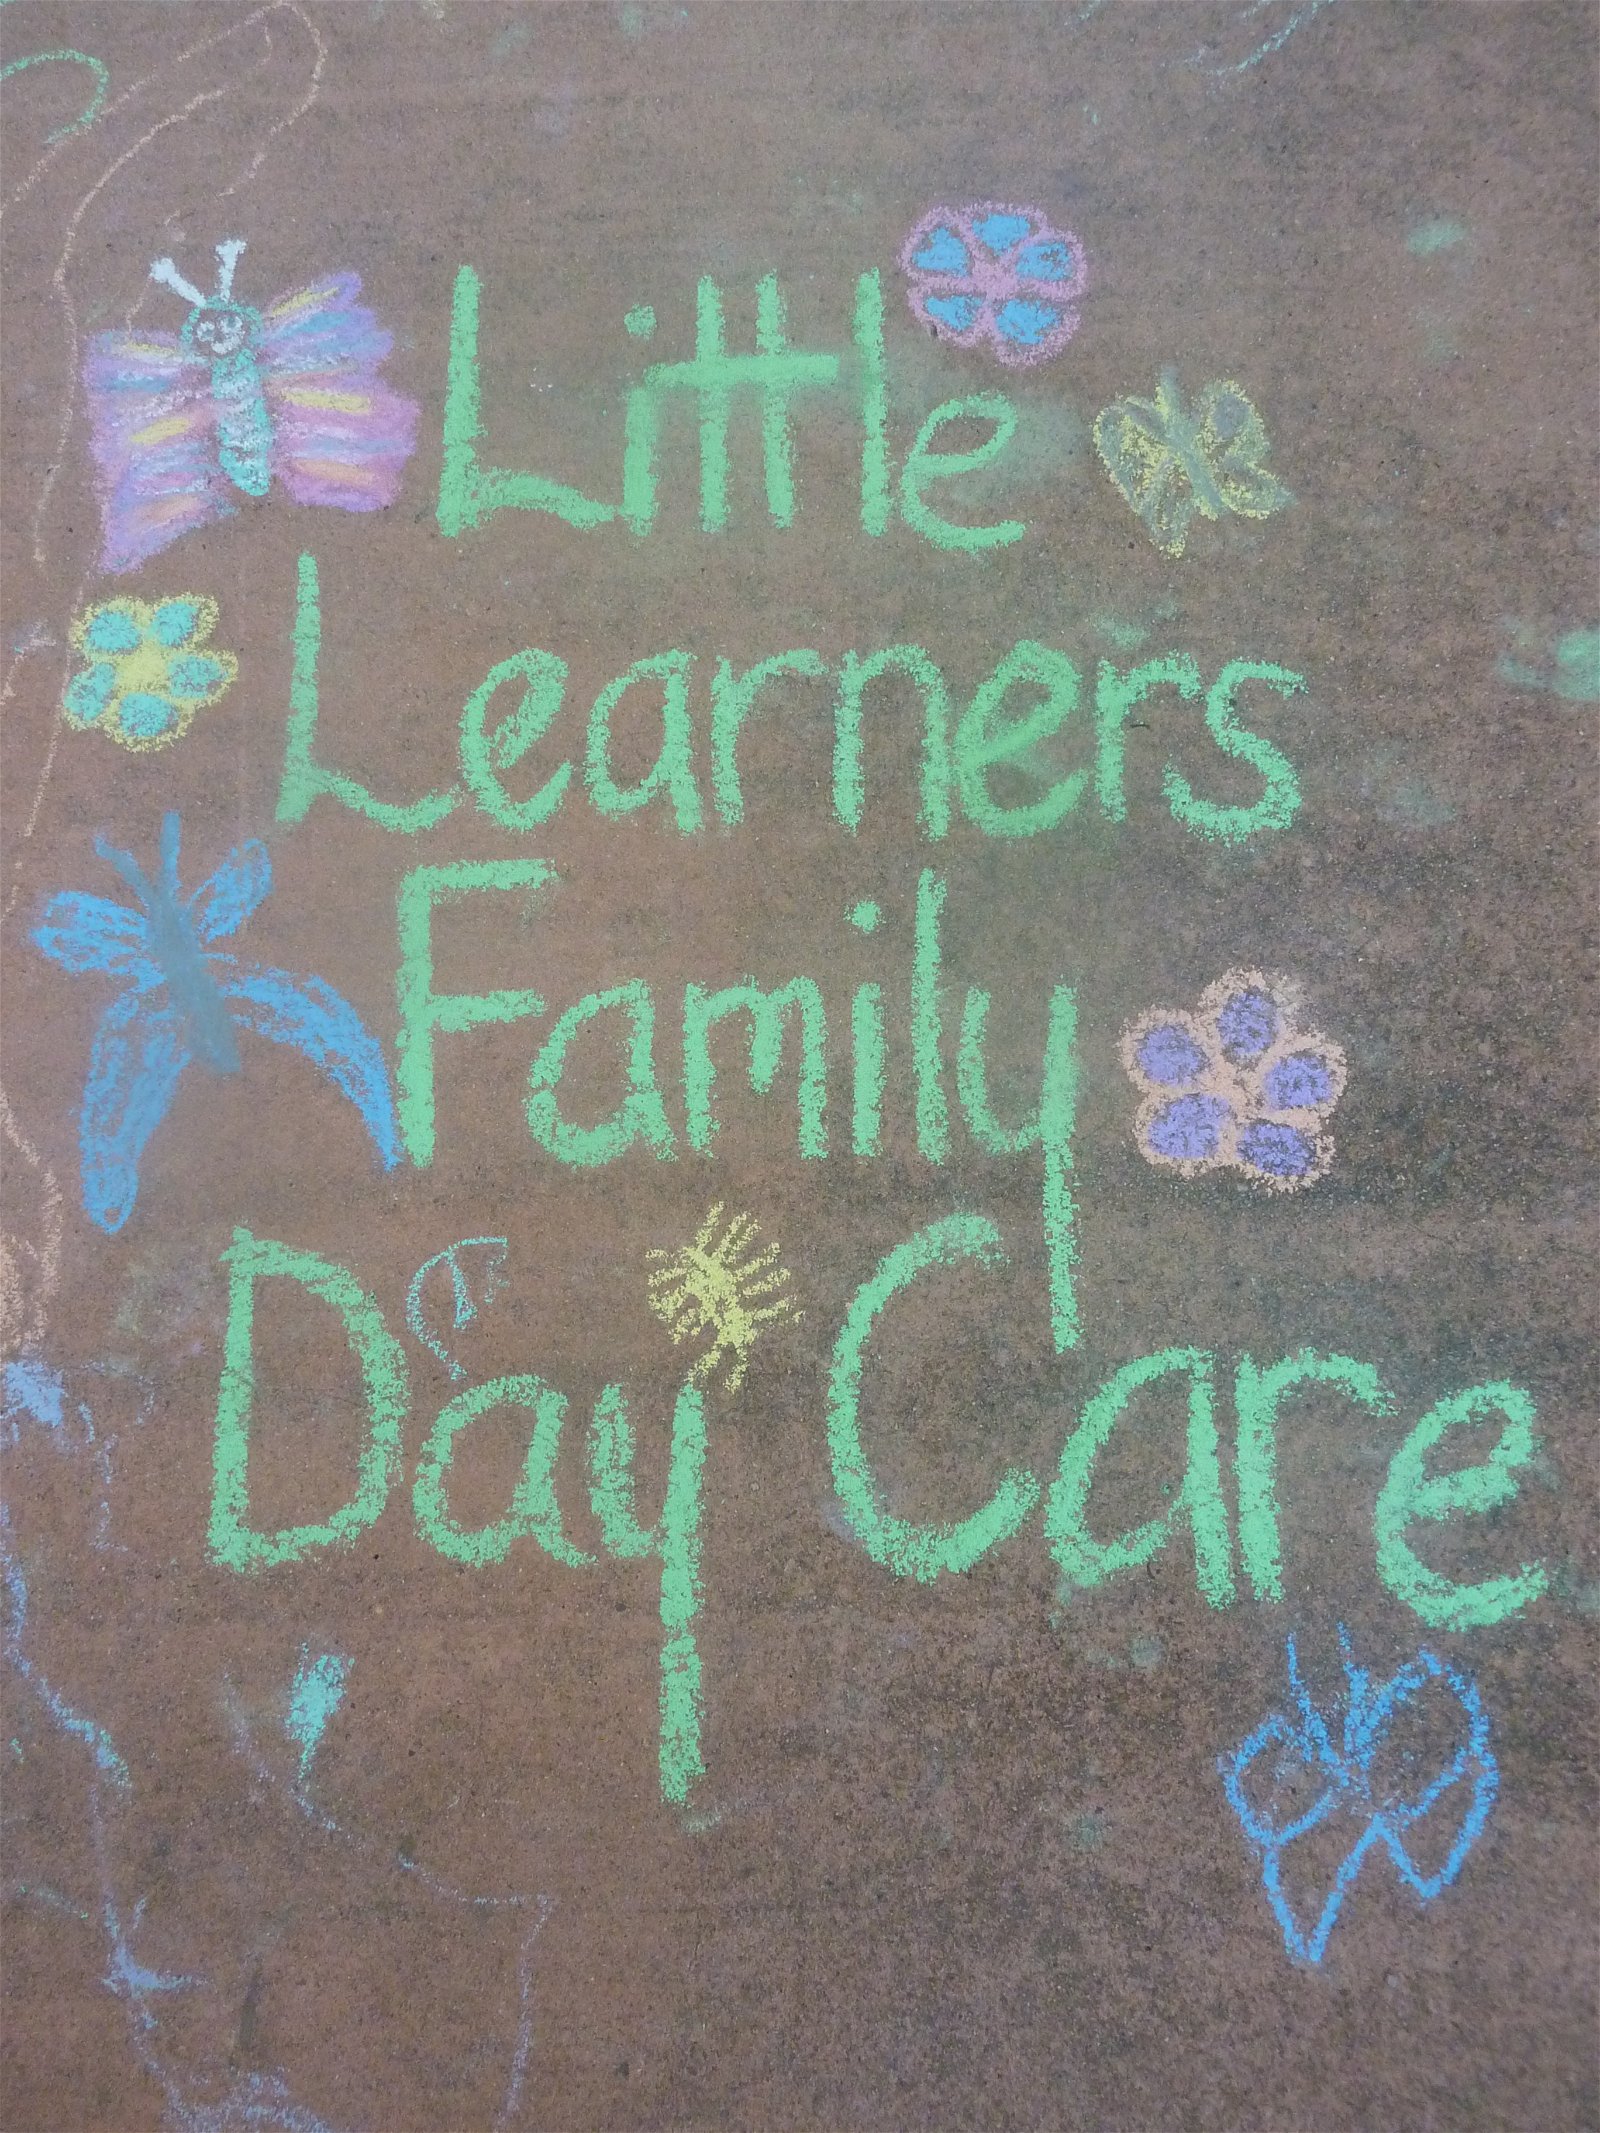 Little Learners Family Day Care - Child Care Sydney